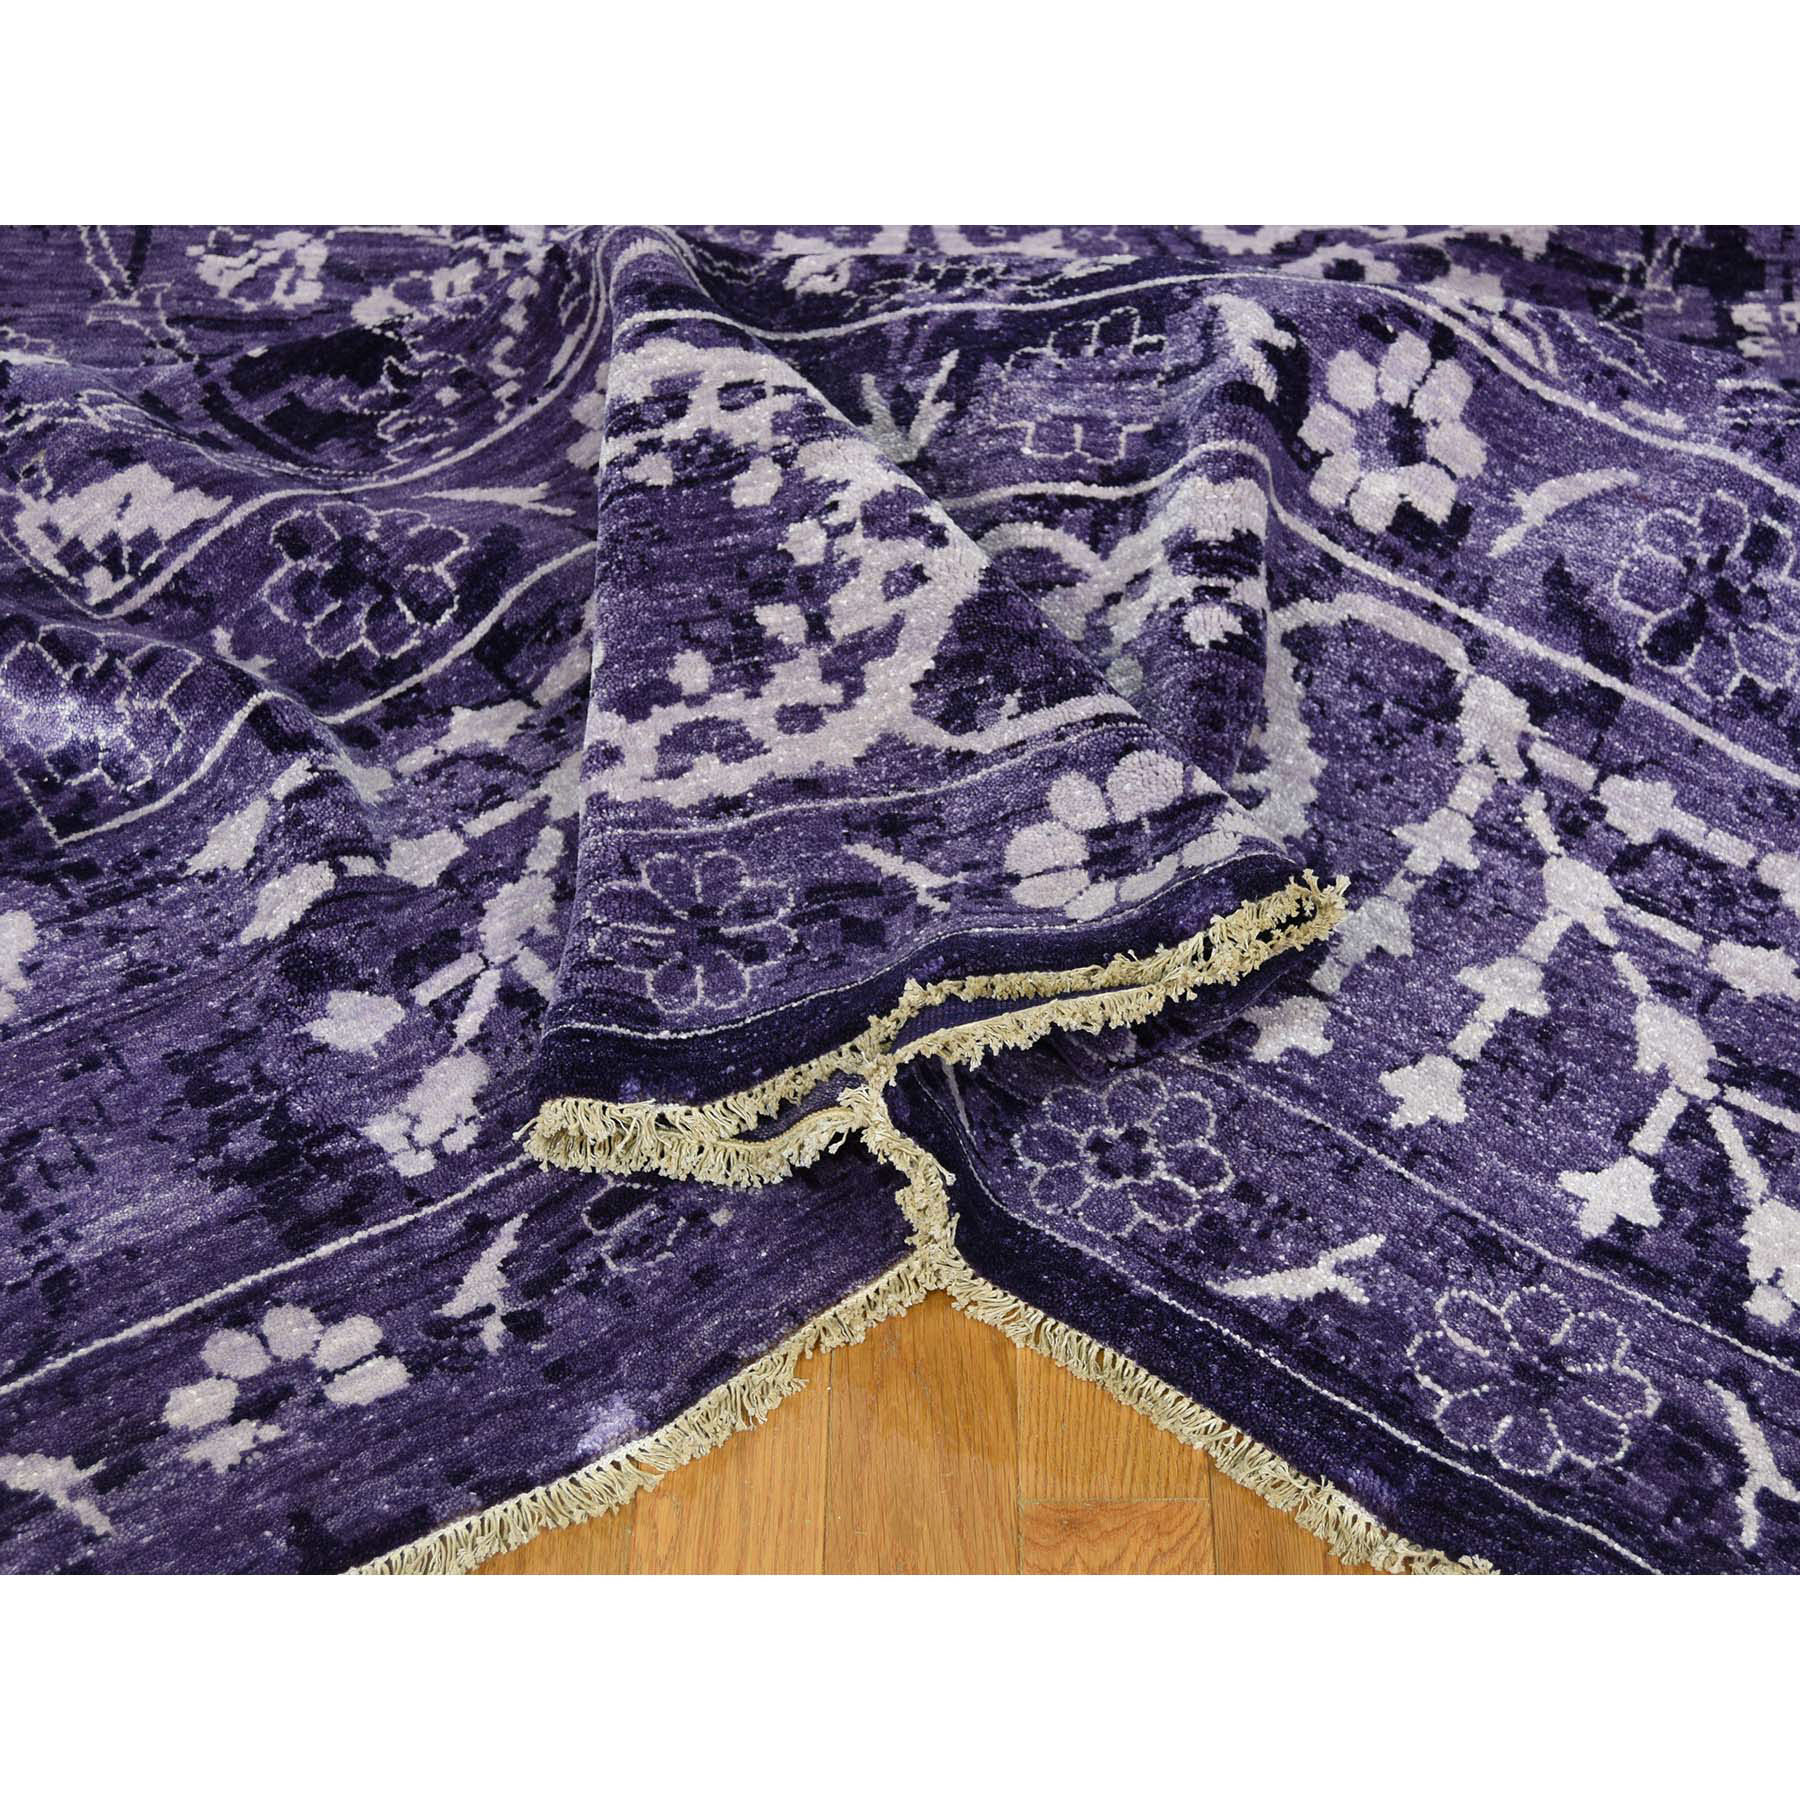 9-x12- Purple Wool And Silk Hand-Knotted Tone on Tone Tabriz Rug 